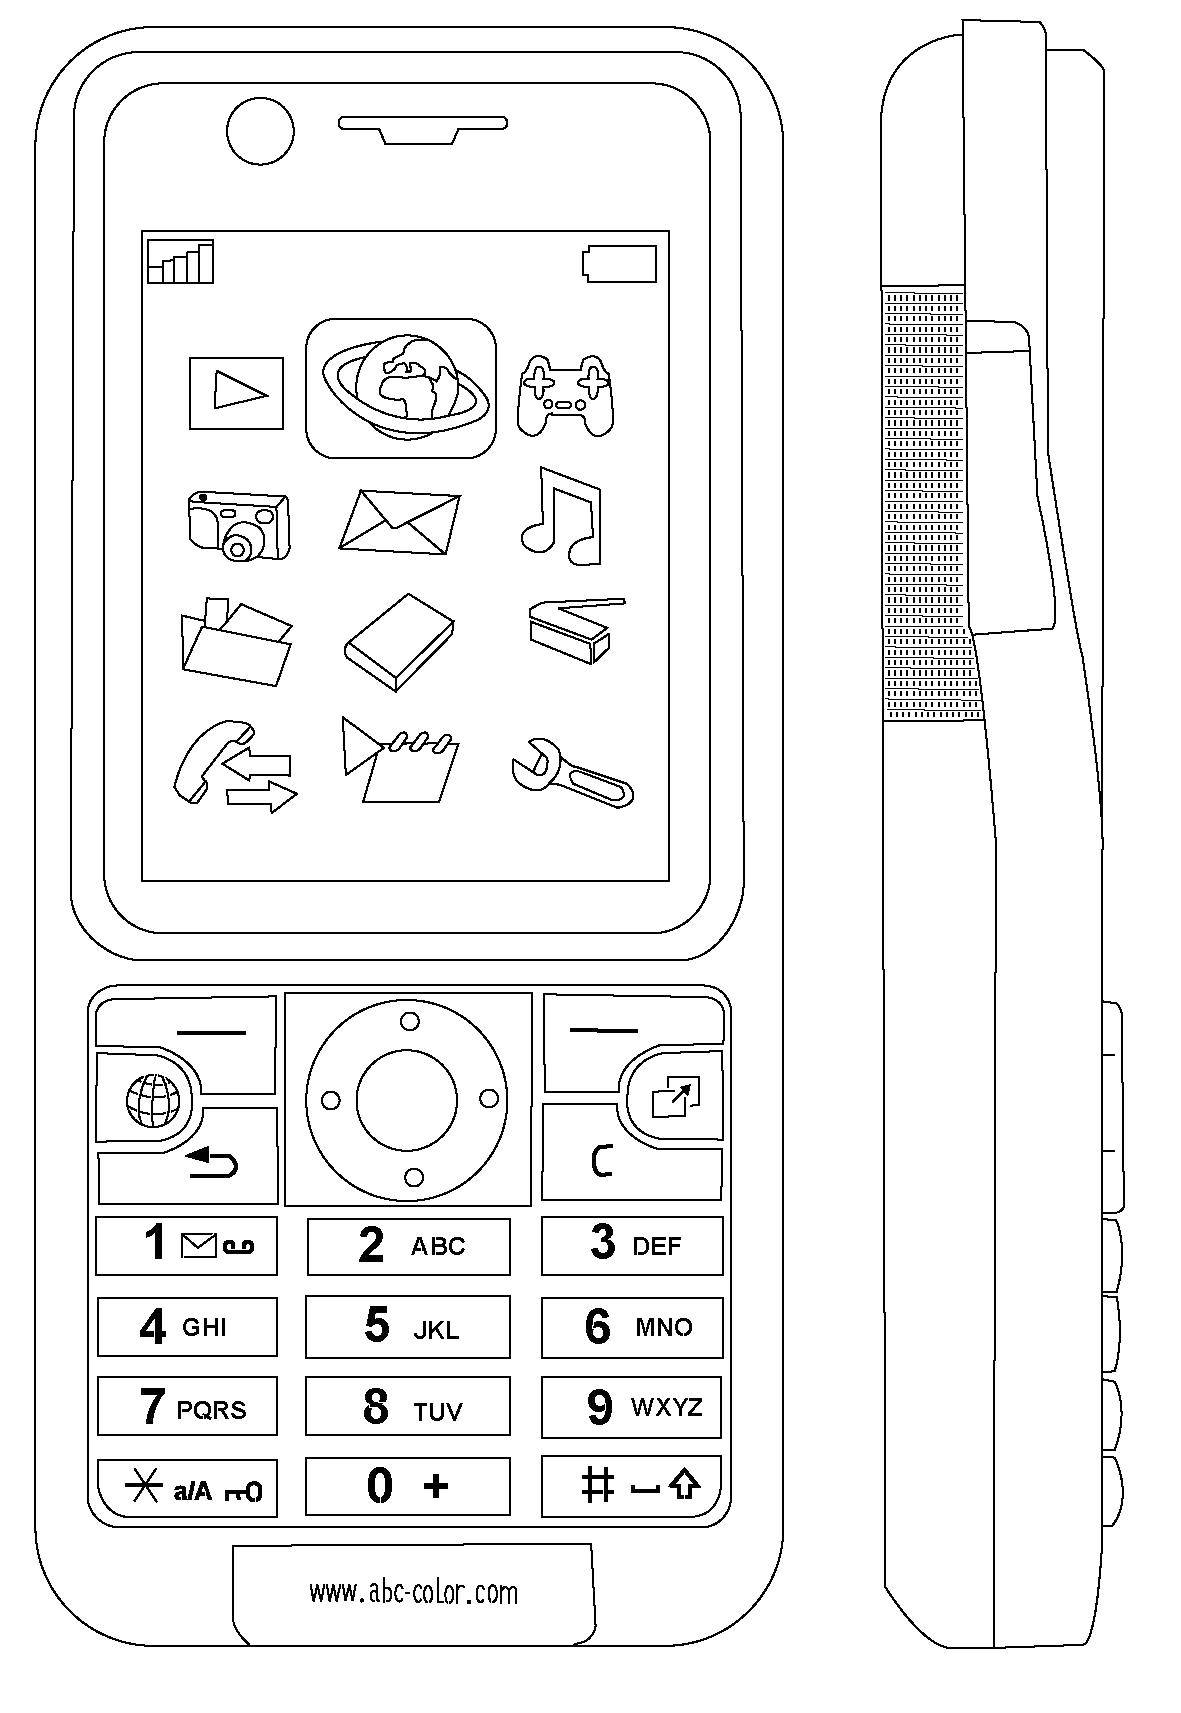 Online Coloring Pages Coloring Page Menu On The Cell Phone Coloring Download Print Coloring Page